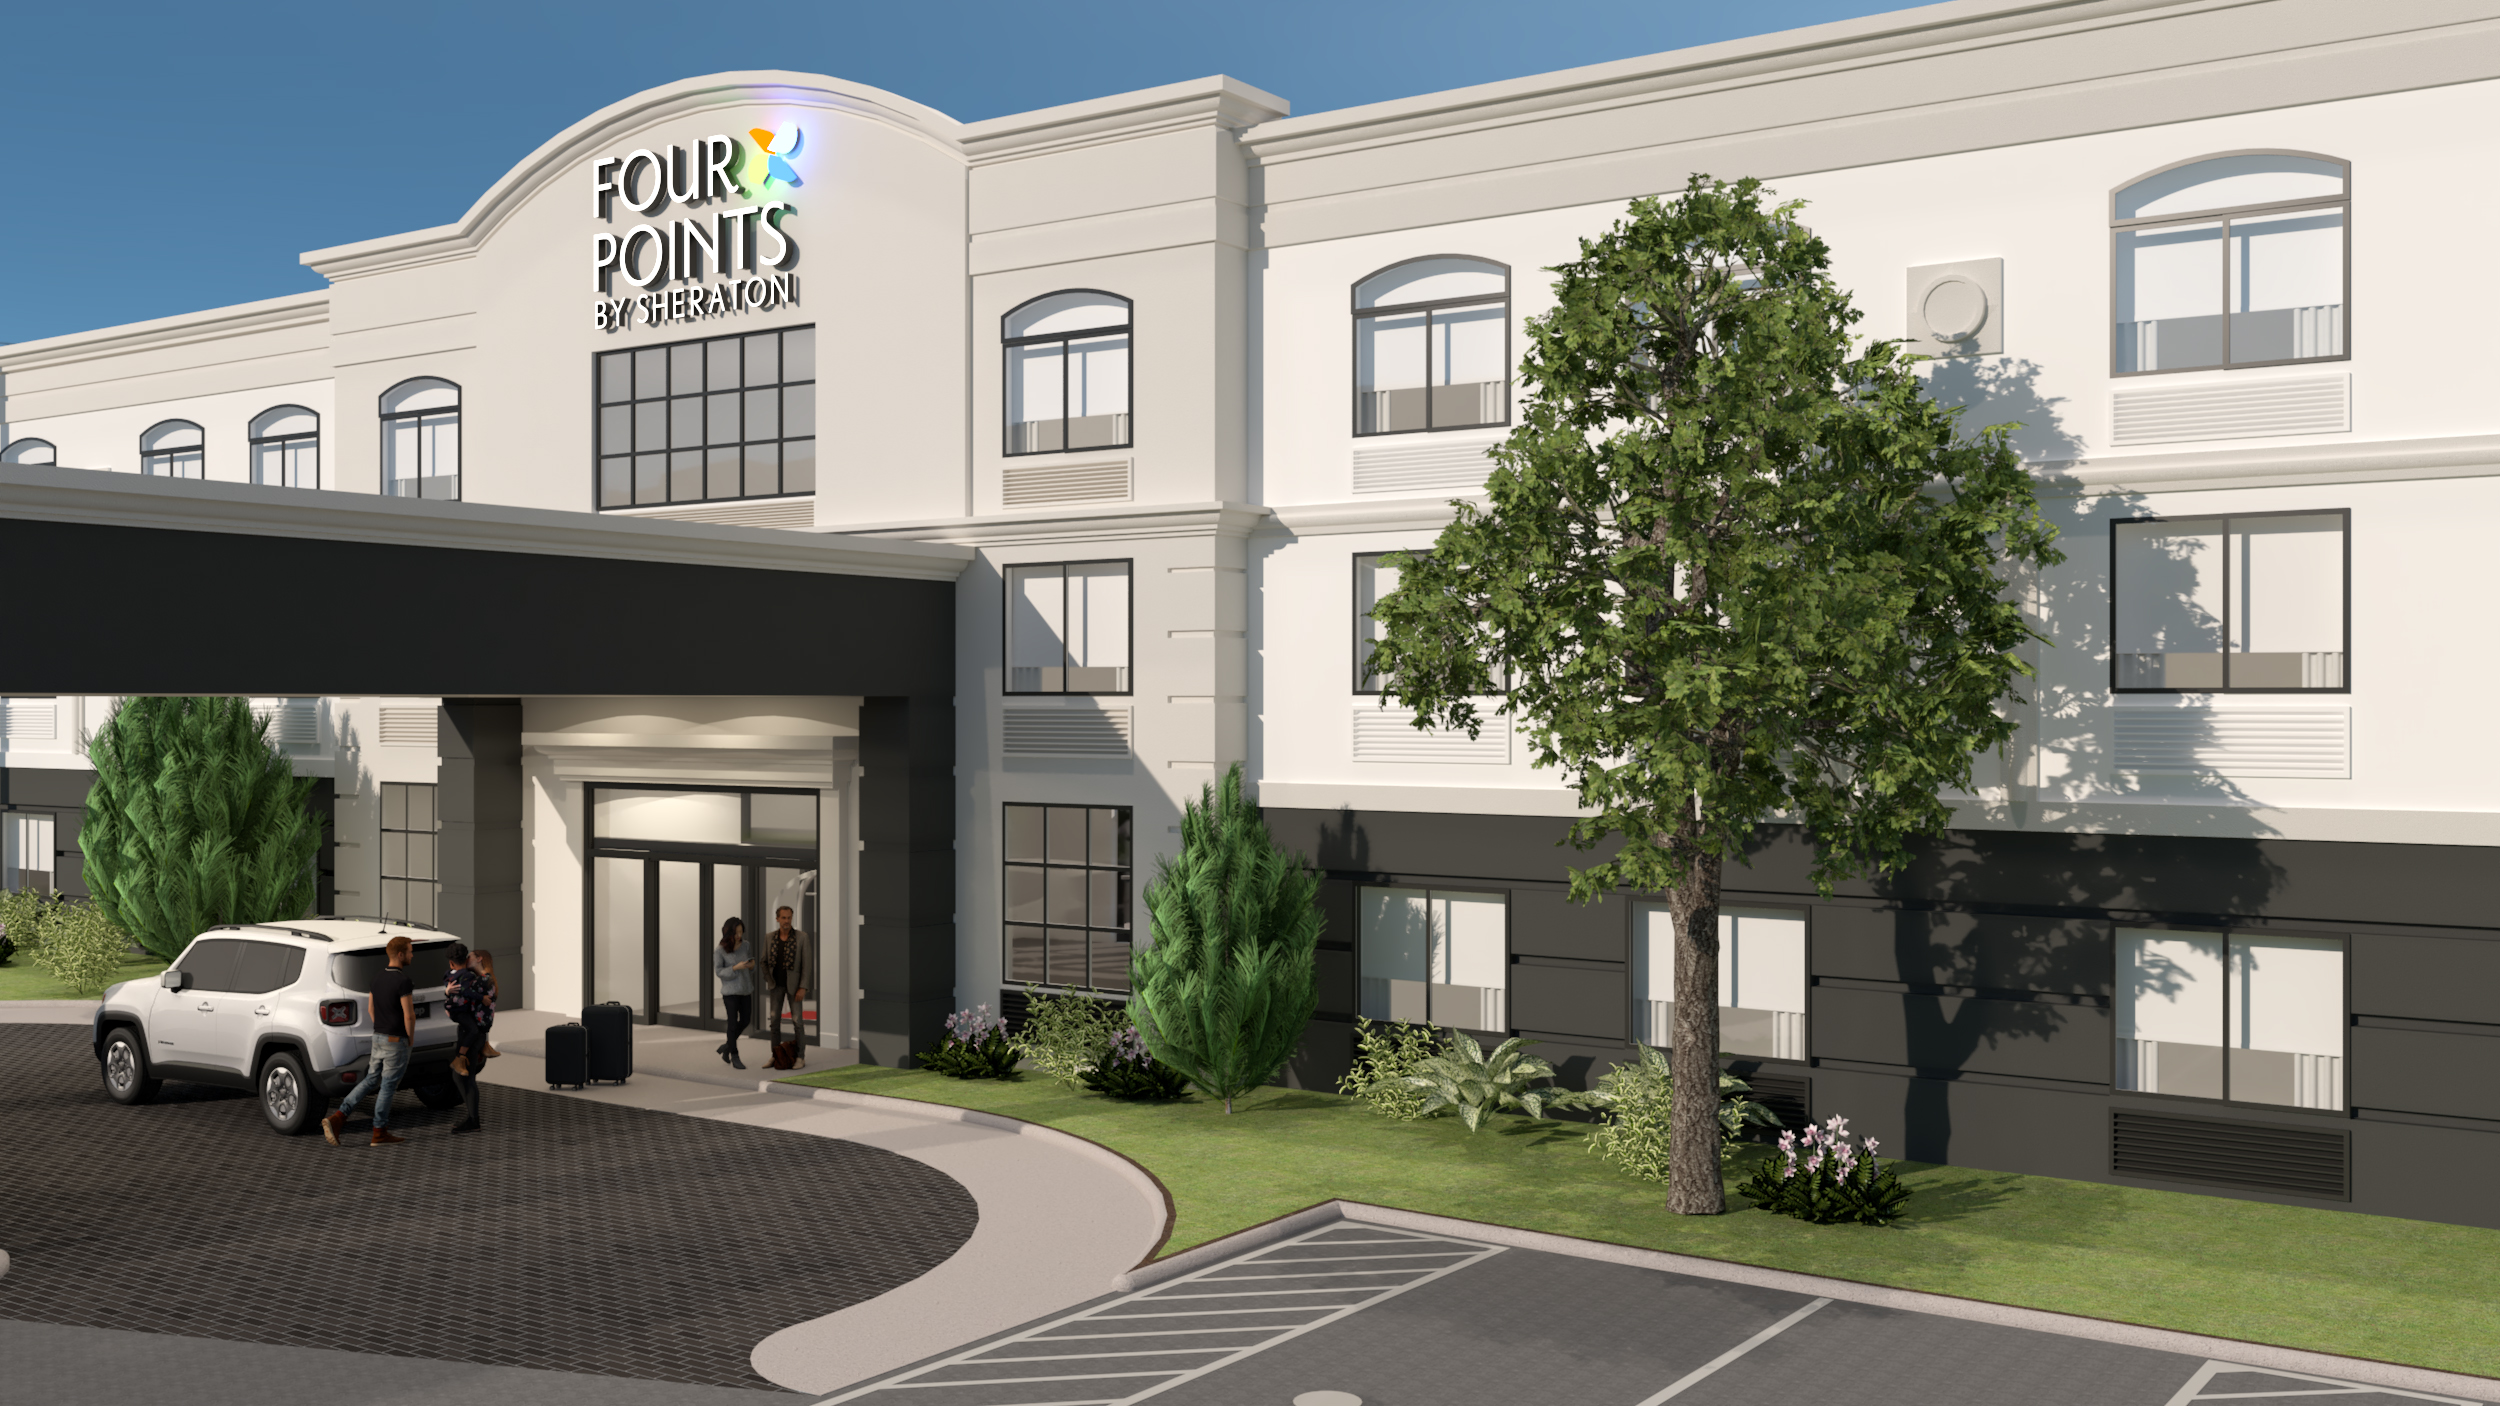 four points by sheraton exterior rendering